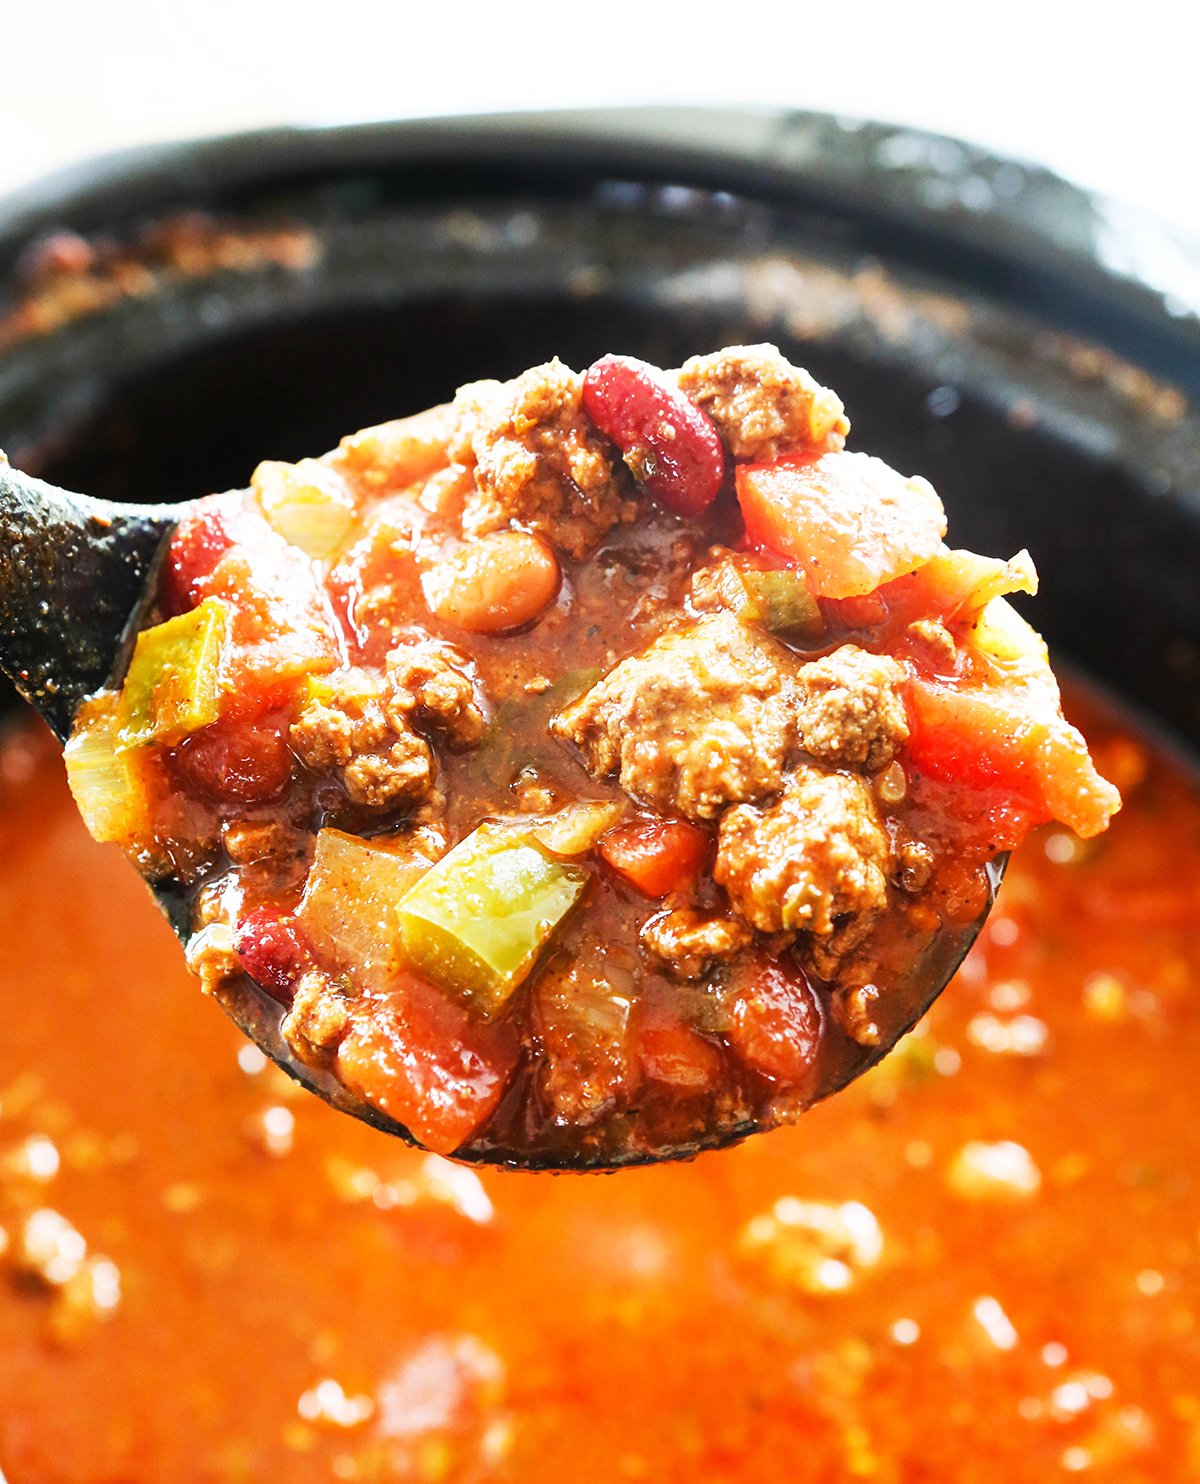 Slow Cooker Turkey Chili - Simply Happy Foodie